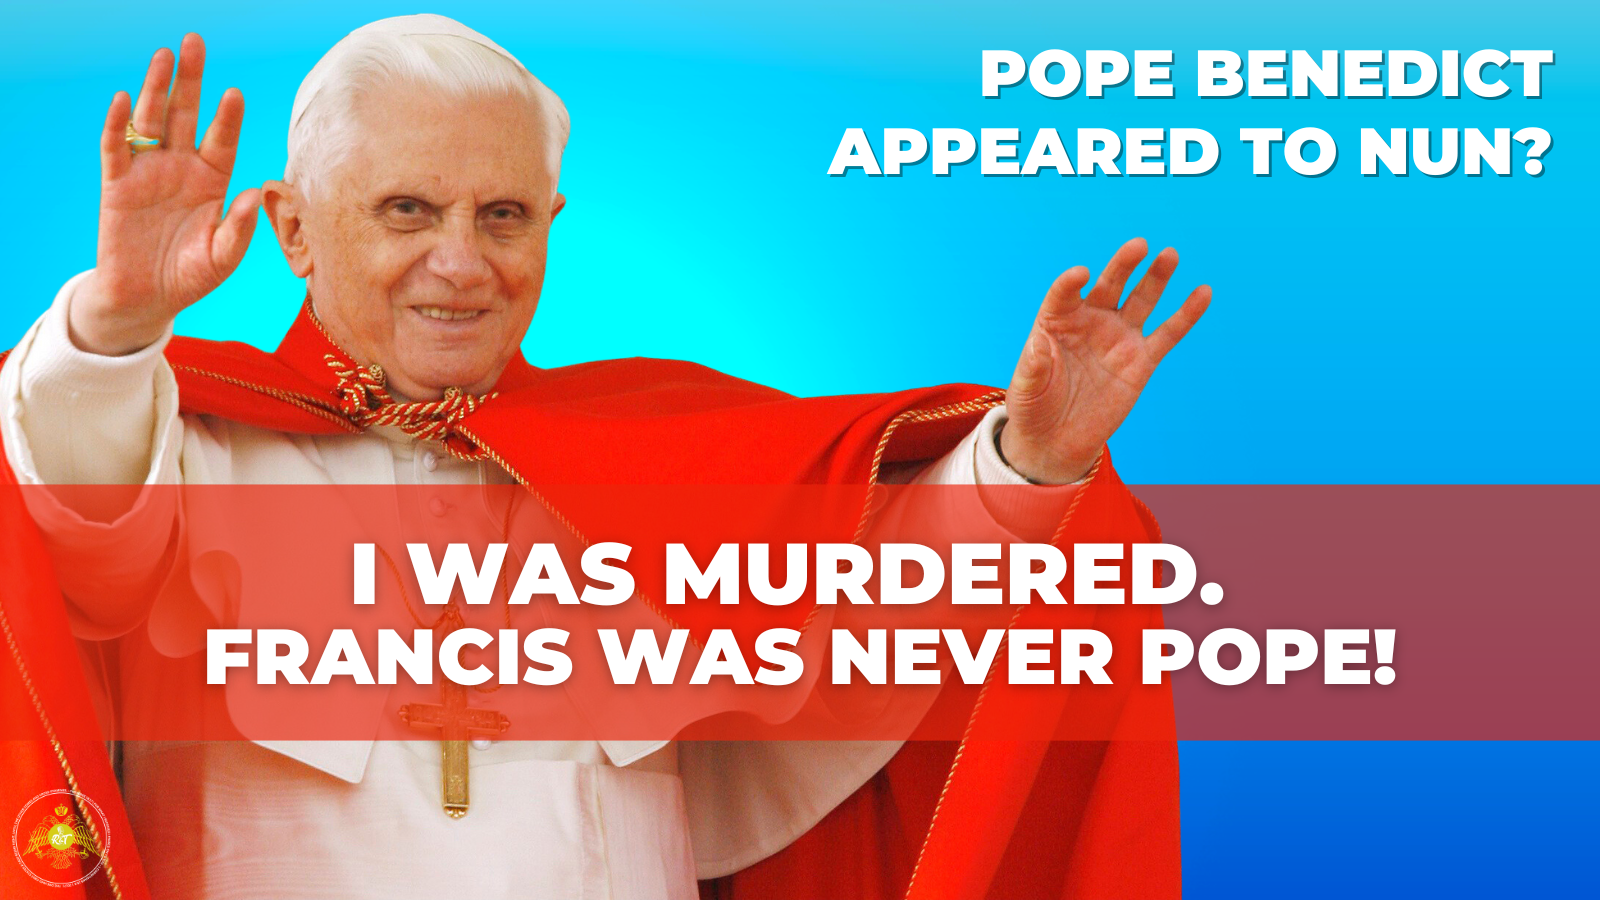 I WAS MURDERED! Pope Benedict Appears to Nun?